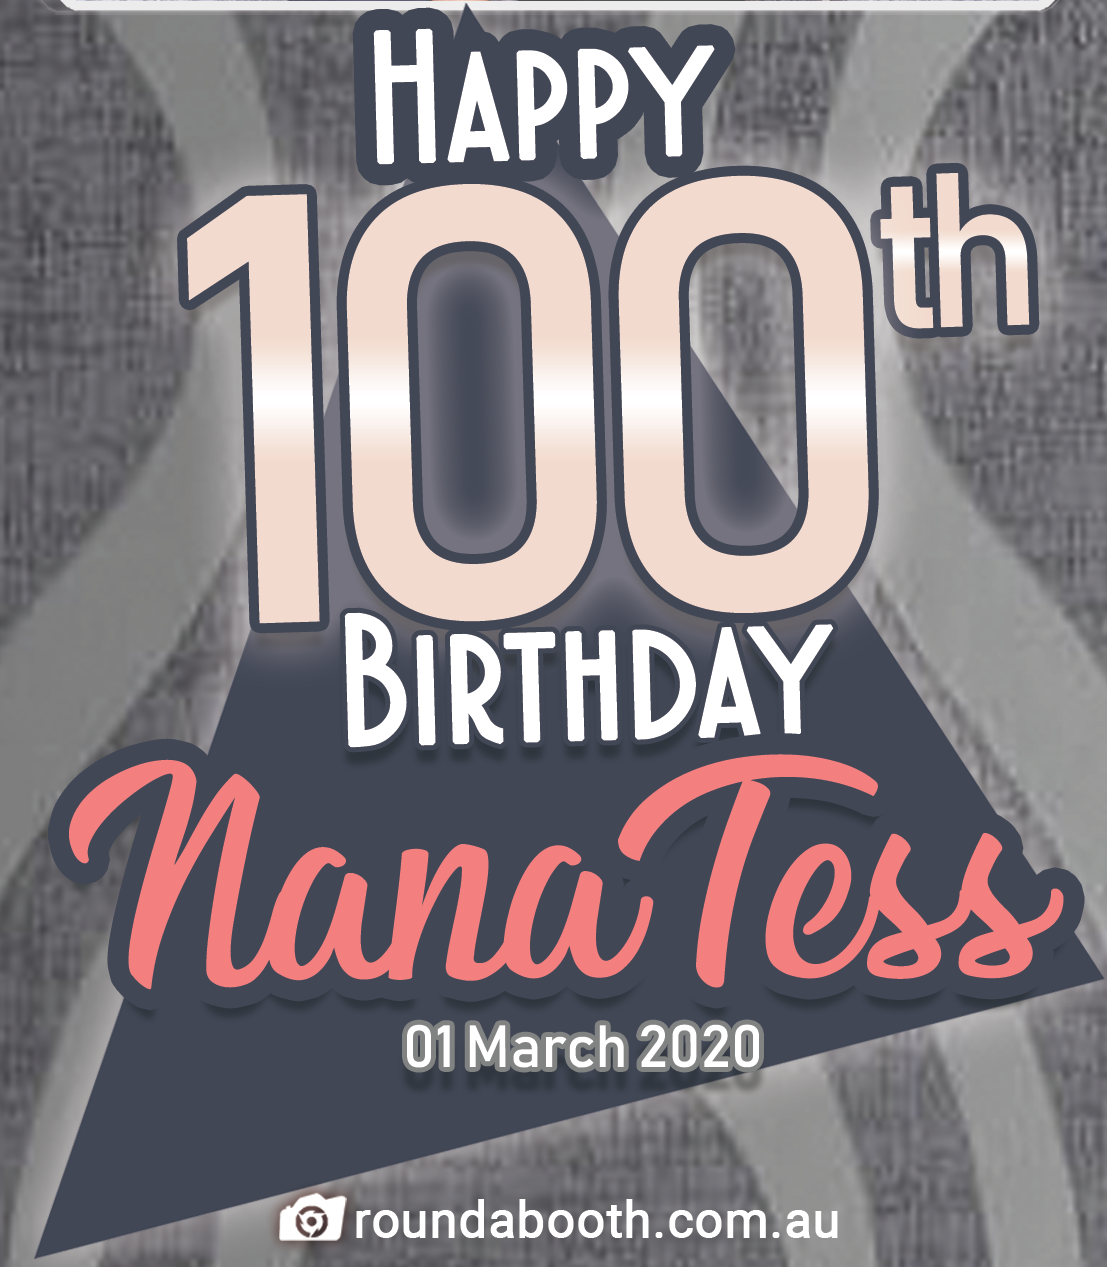 Roundabooth print template for a 100th birthday at Marsden Park NSW